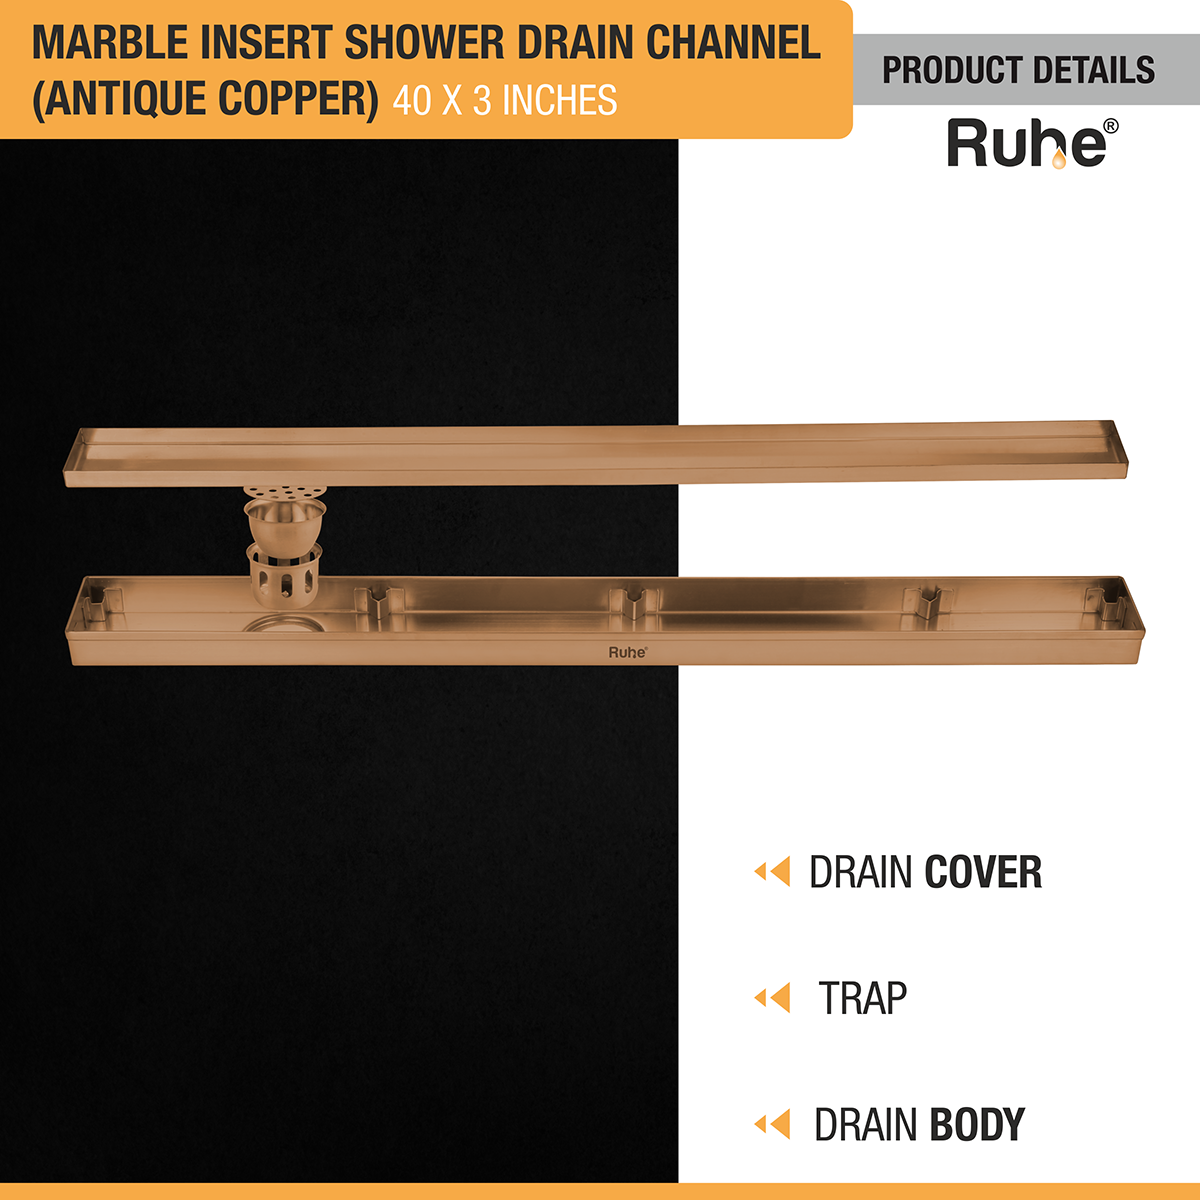 Marble Insert Shower Drain Channel (40 x 3 Inches) ROSE GOLD PVD Coated drain cover, trap, and drain body